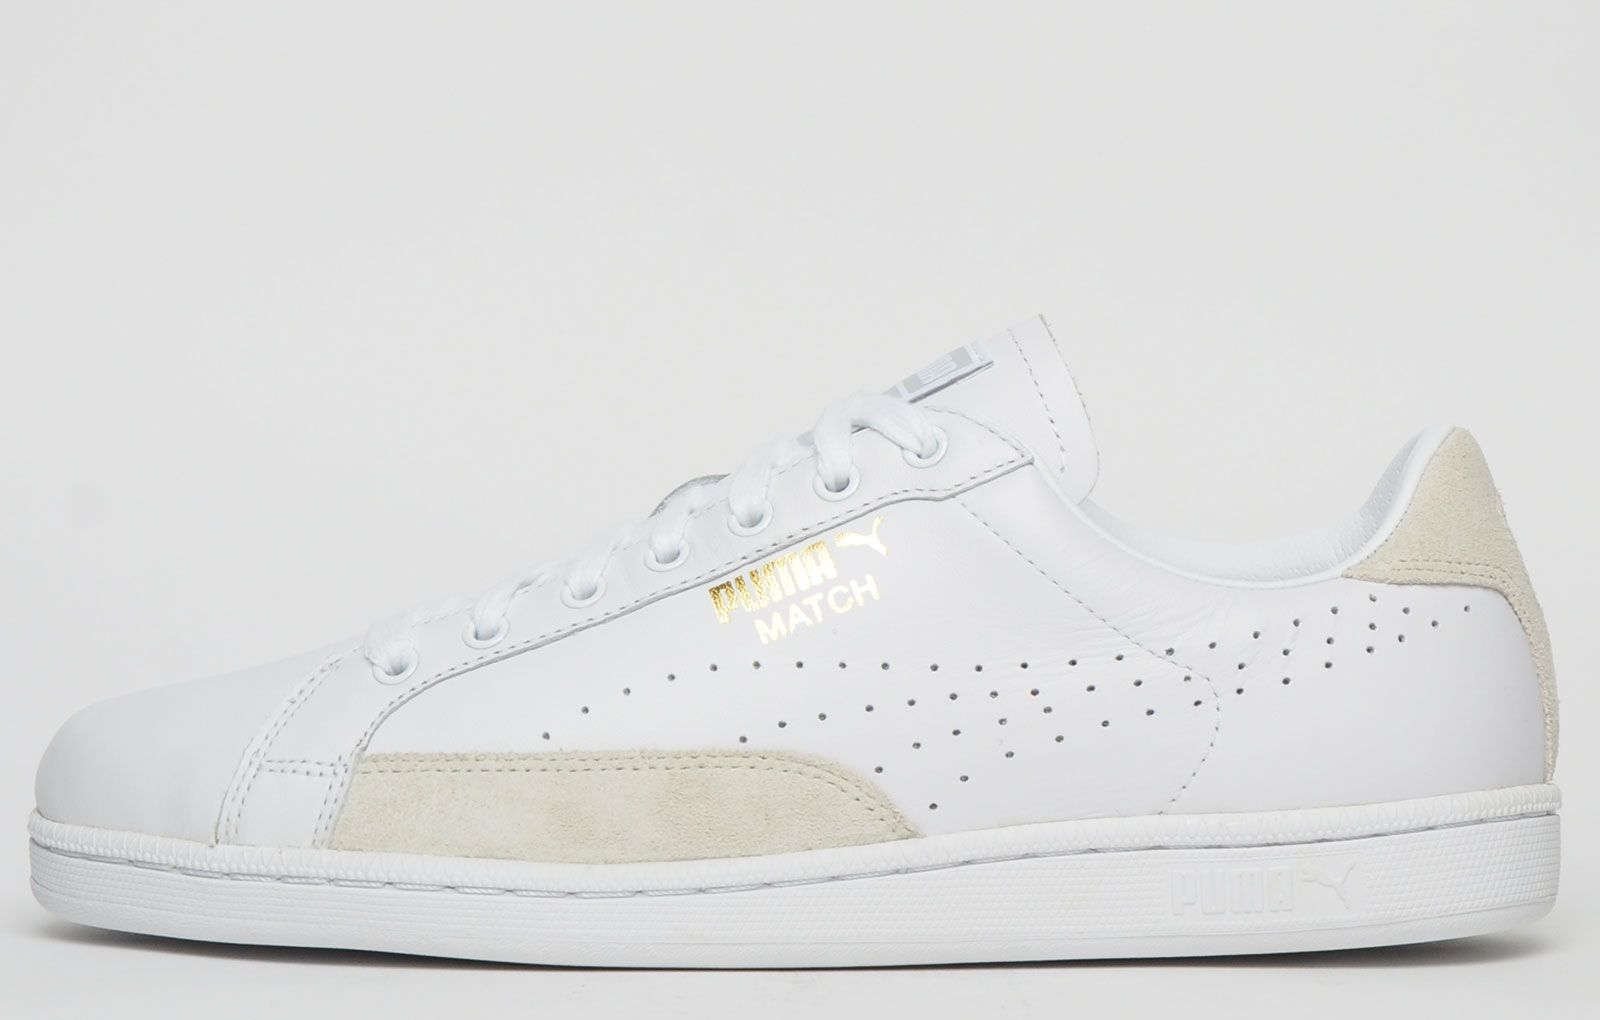 <p>The Puma Match 74 UPC from the iconic 1974 tennis collection features a soft leather upper with side perforations for breathability with the addition of suede panelling to the sides and heel with gold Puma branding to the side to complete the look.</p> <p>The Match 74 men’s shoe is finished off with a durable rubber sole with a textured vintage styled finish which will provide stability and grip on all surfaces and with a slimmed down look to give that sporty designer feel</p><br> <p class=